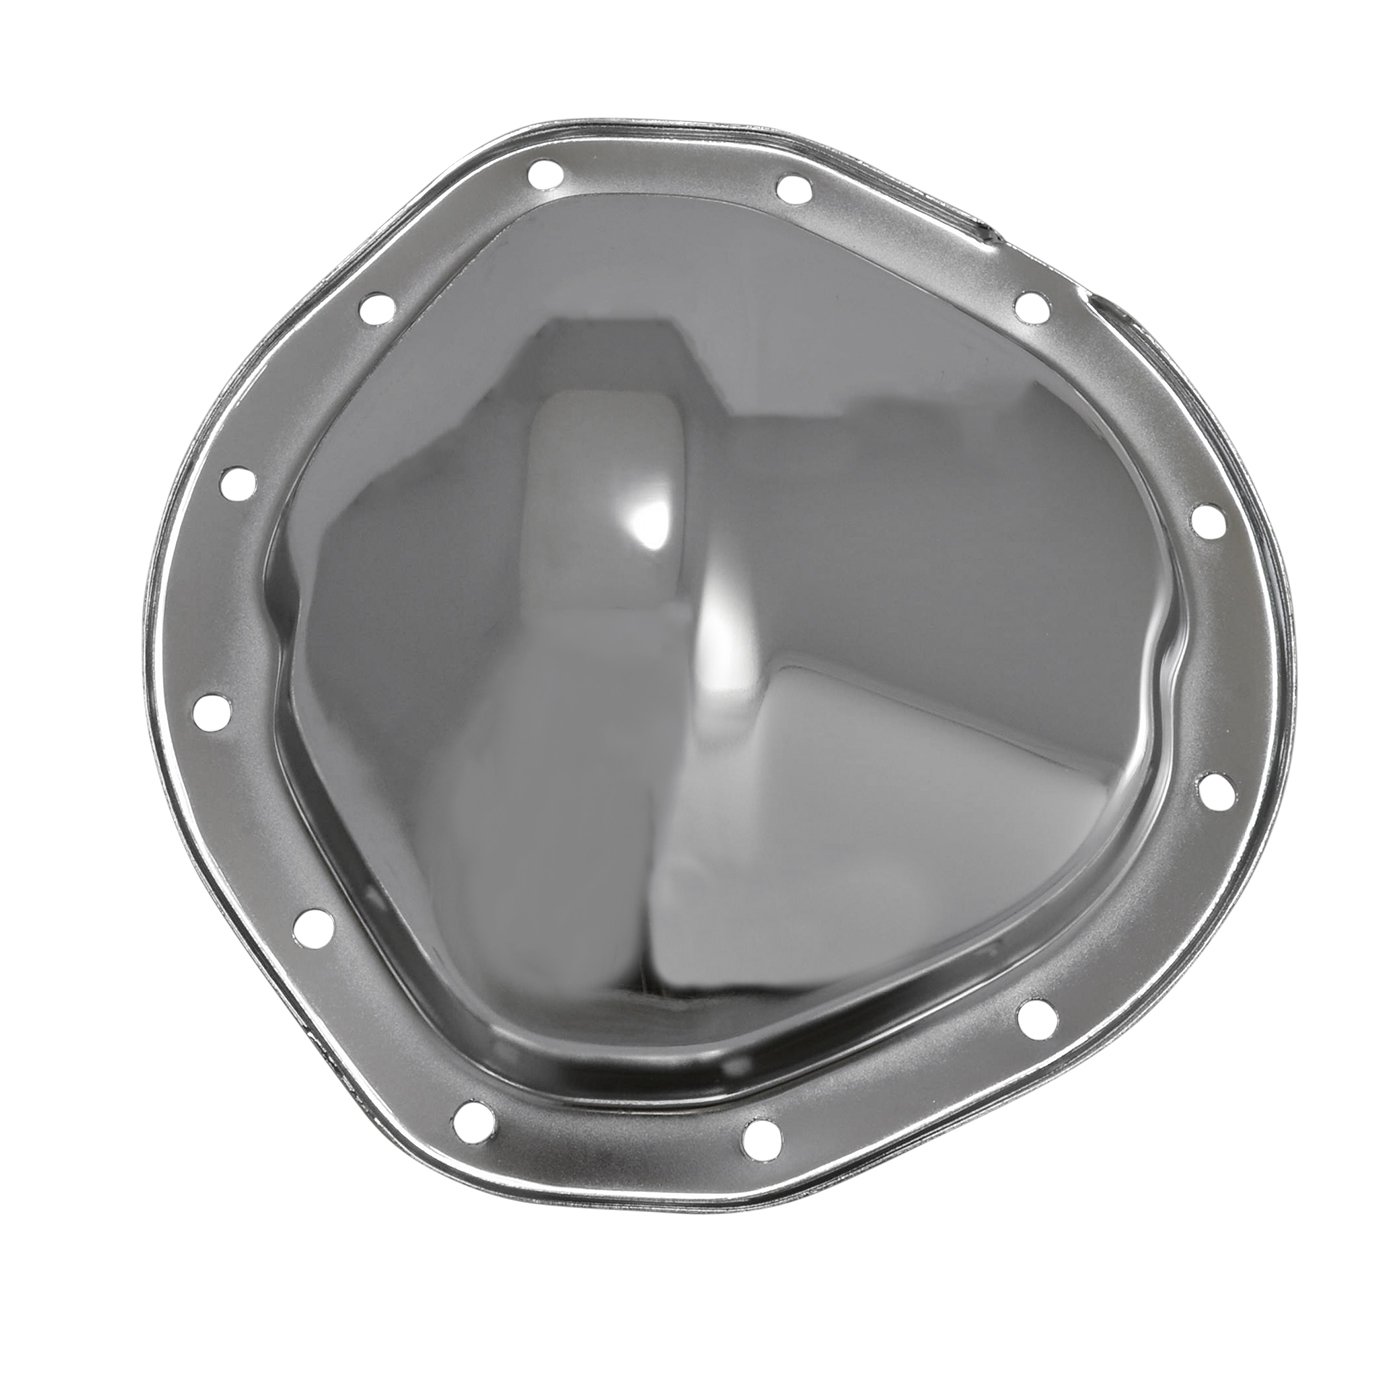 Differential Cover Fits GM 12-Bolt Truck [Chrome]